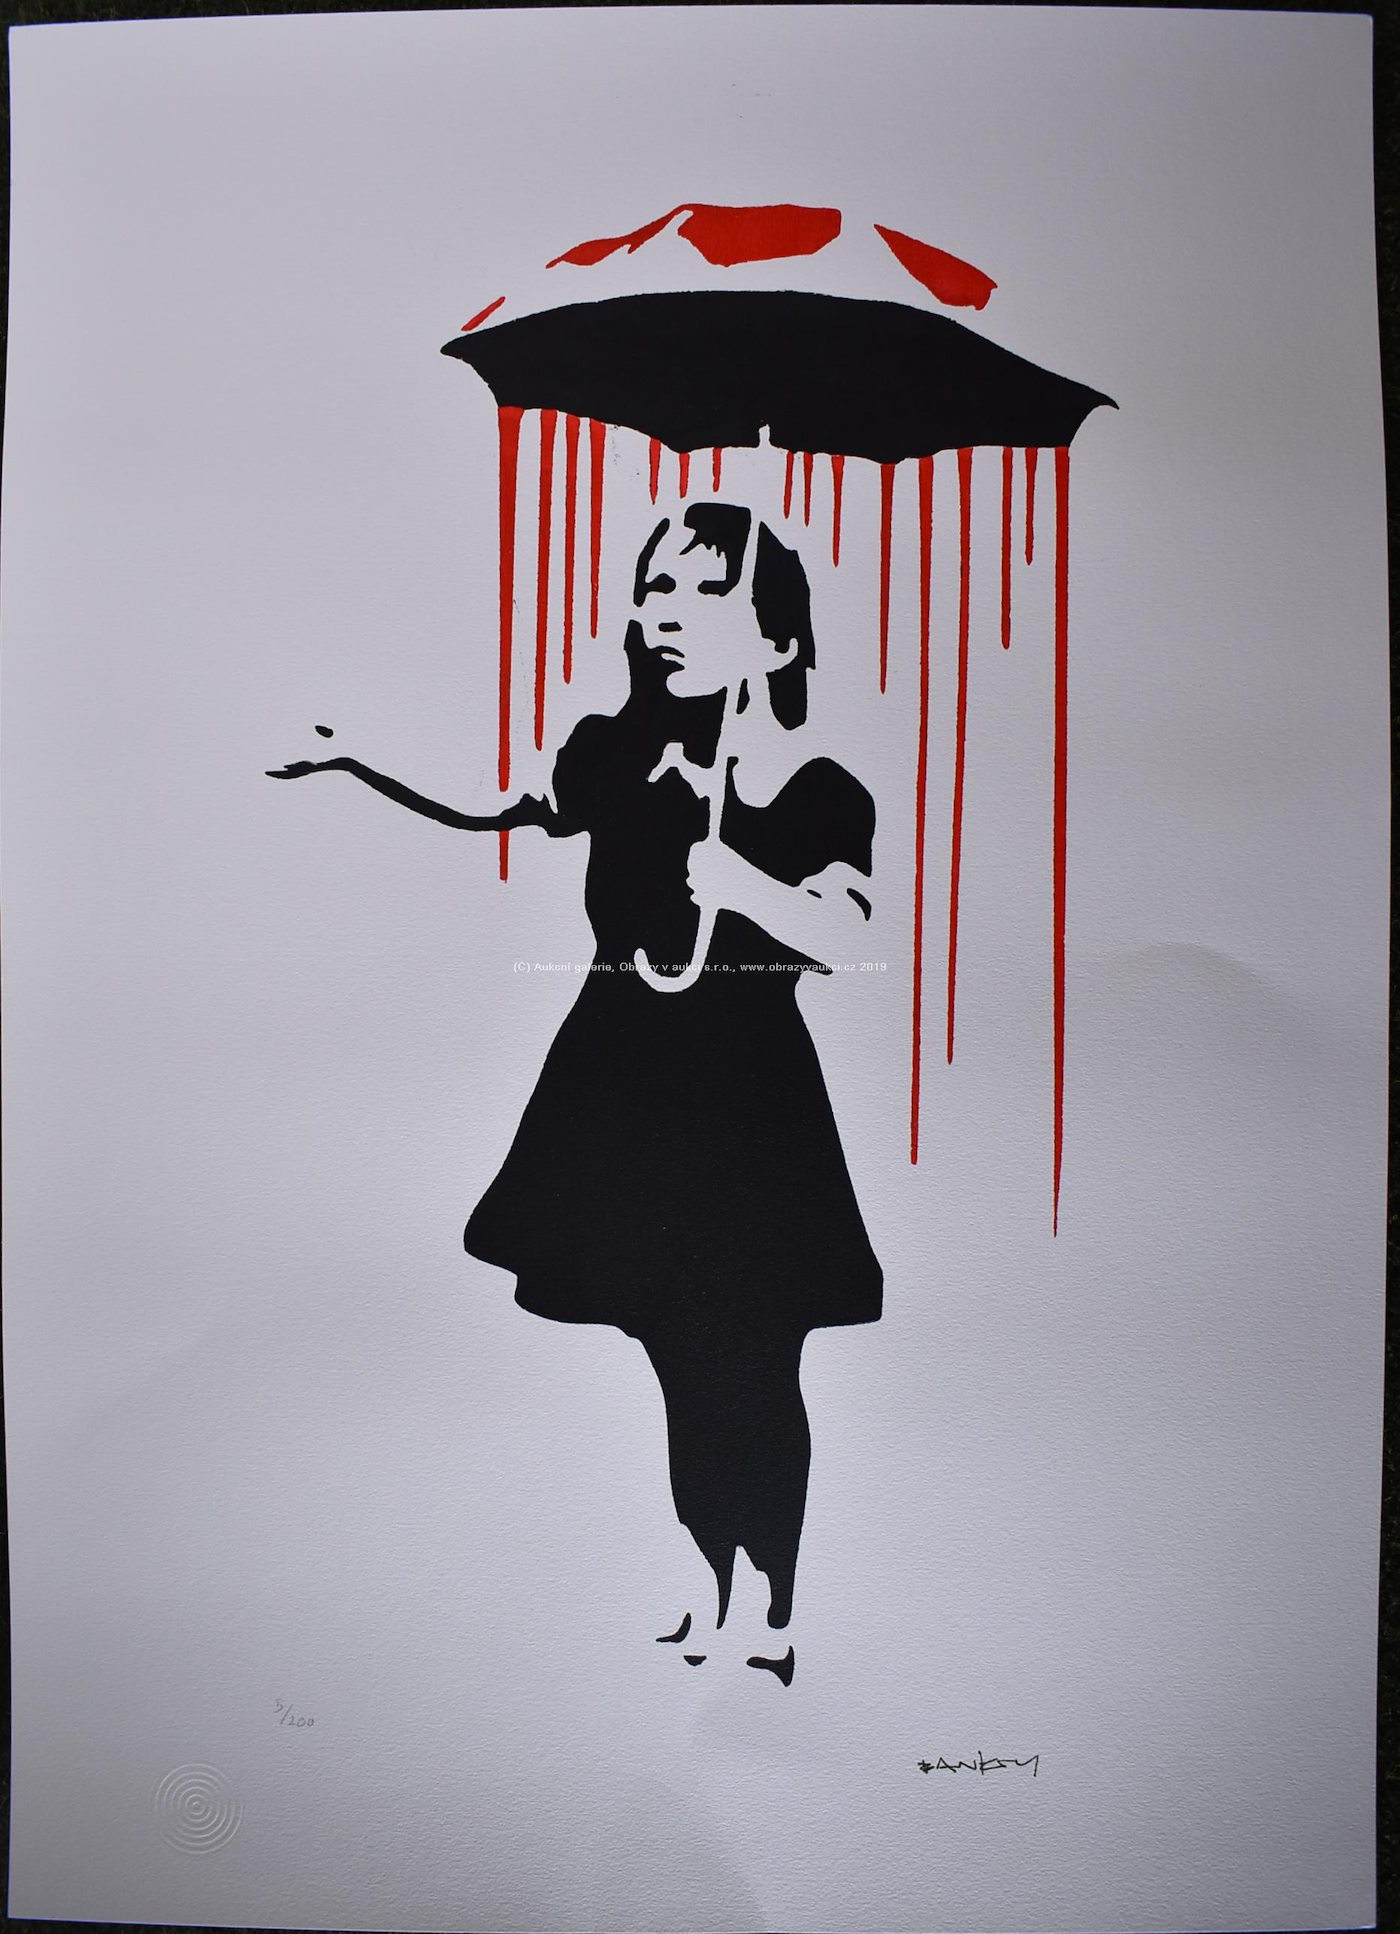 Banksy - Nola Girl with Umbrella Red Rain and Red Top